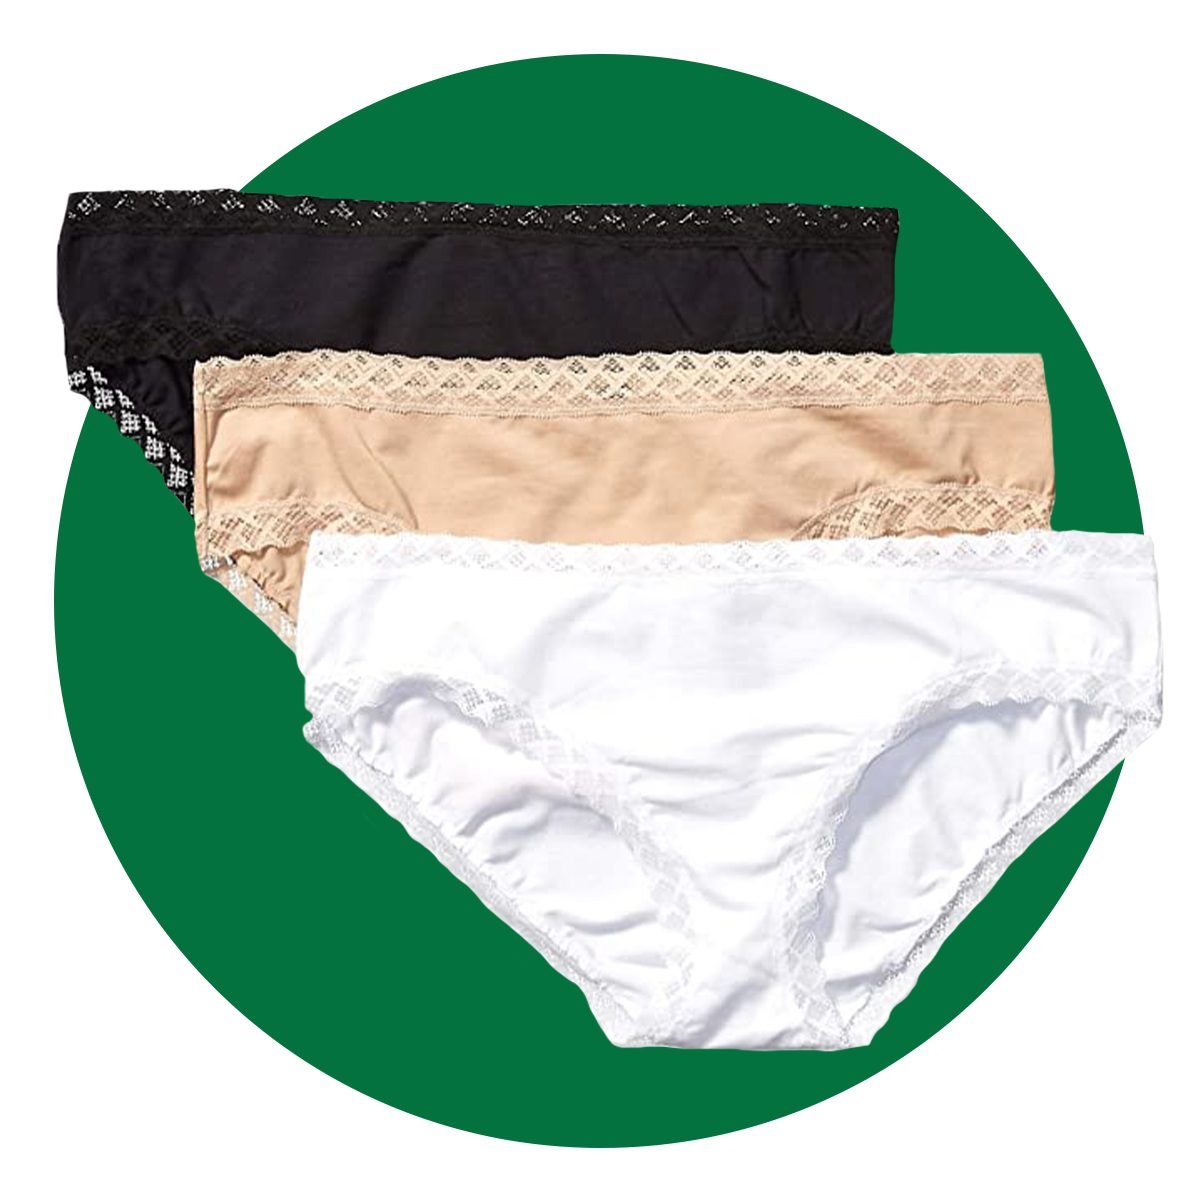 Gynecologist-Approved Underwear Rules to Live By